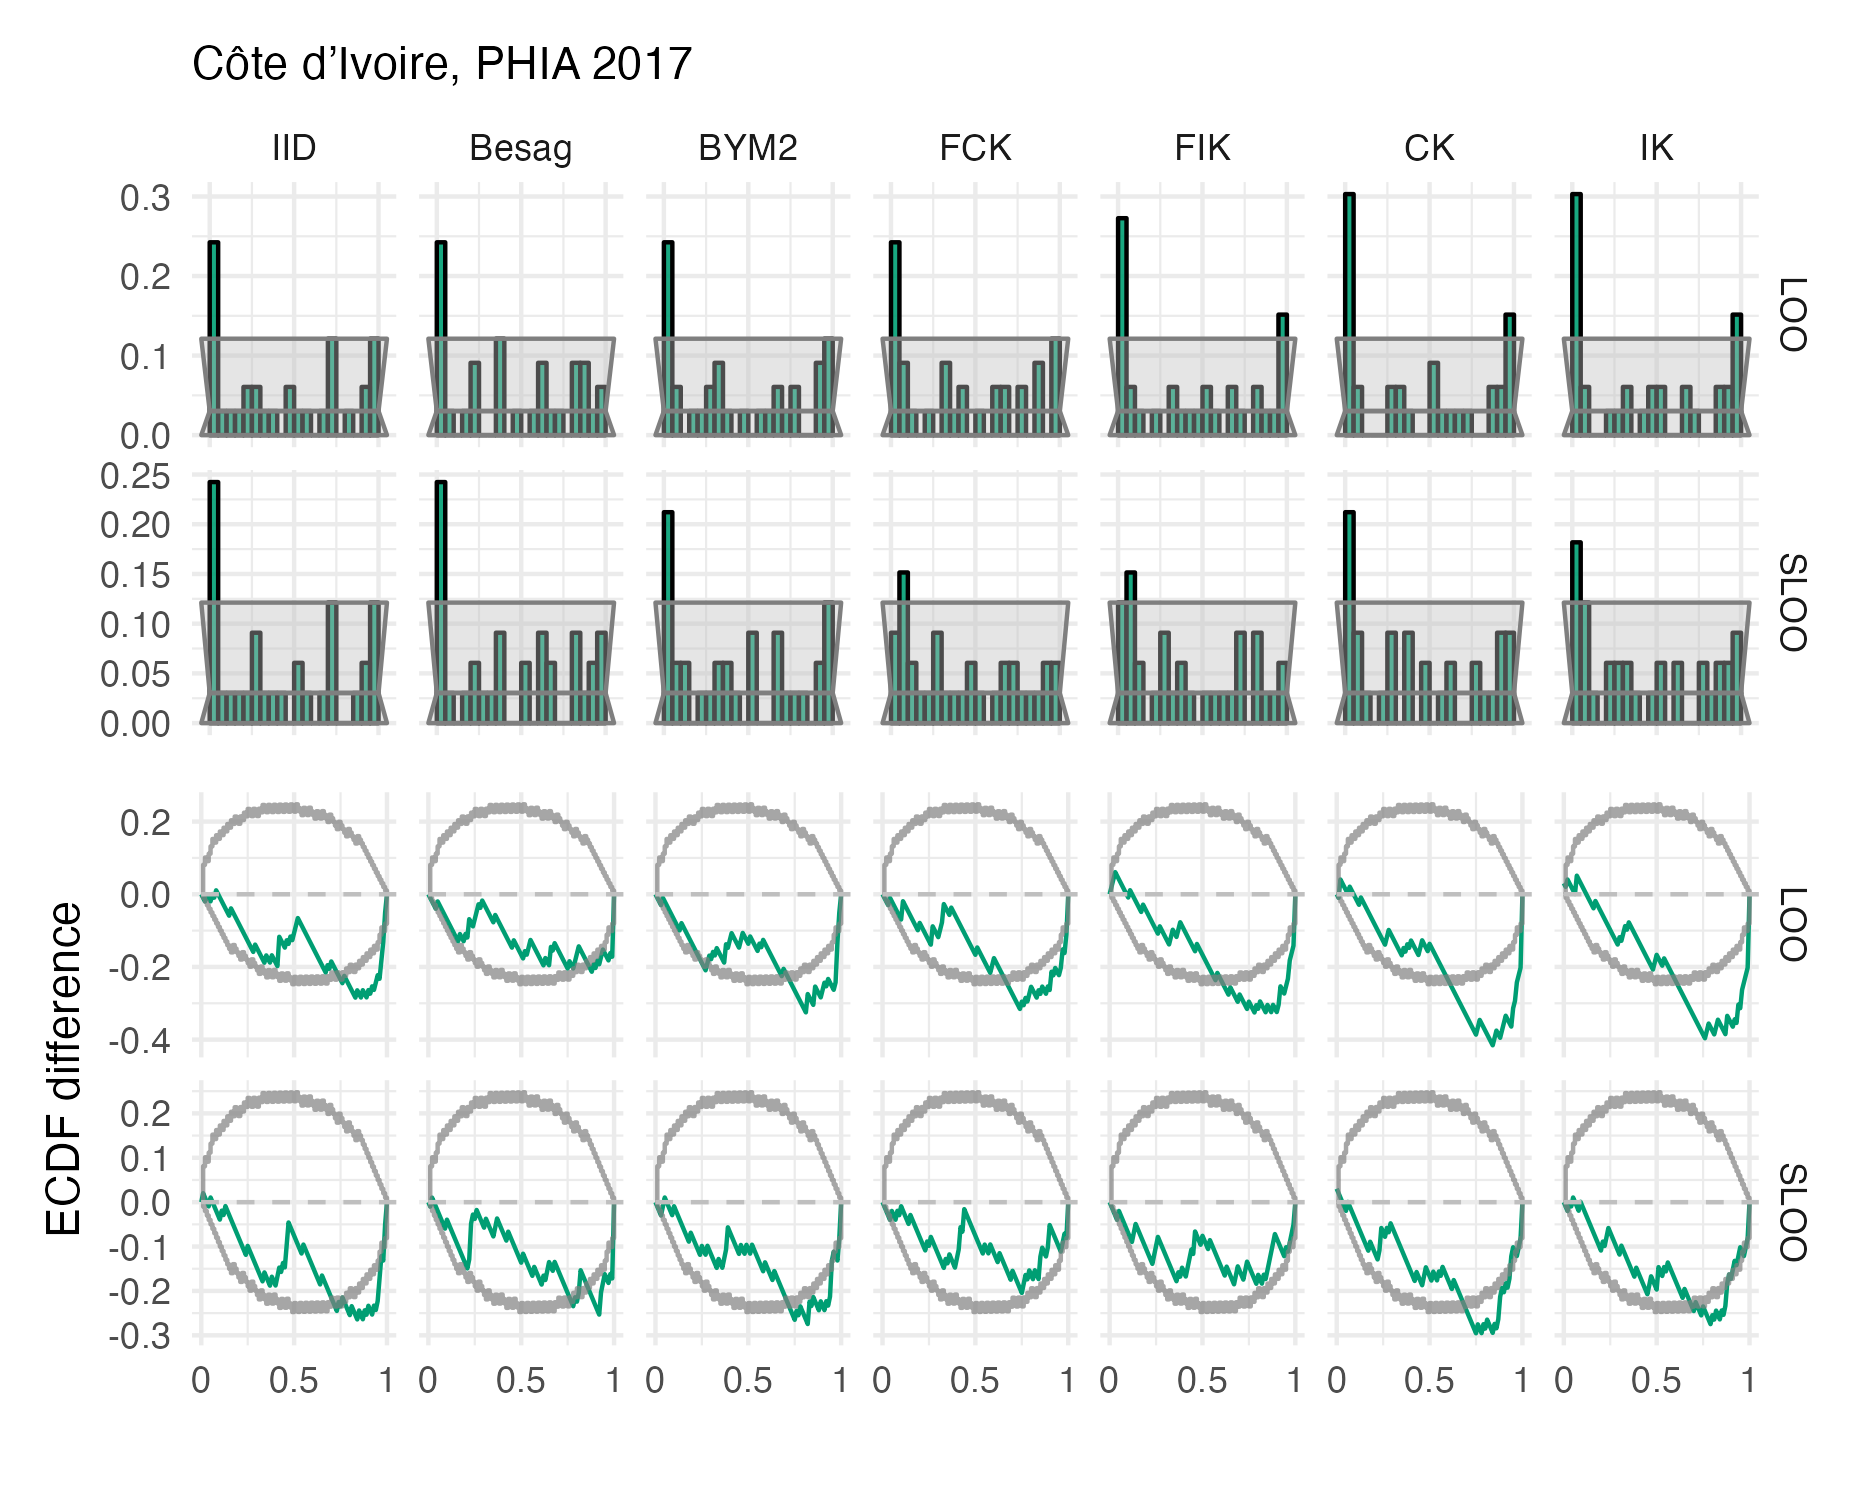 Probability integral transform histograms and empirical cumulative distribution function difference plots in estimating \(\rho\) for the Côte d’Ivoire 2017 PHIA survey (Panel 4.10A).